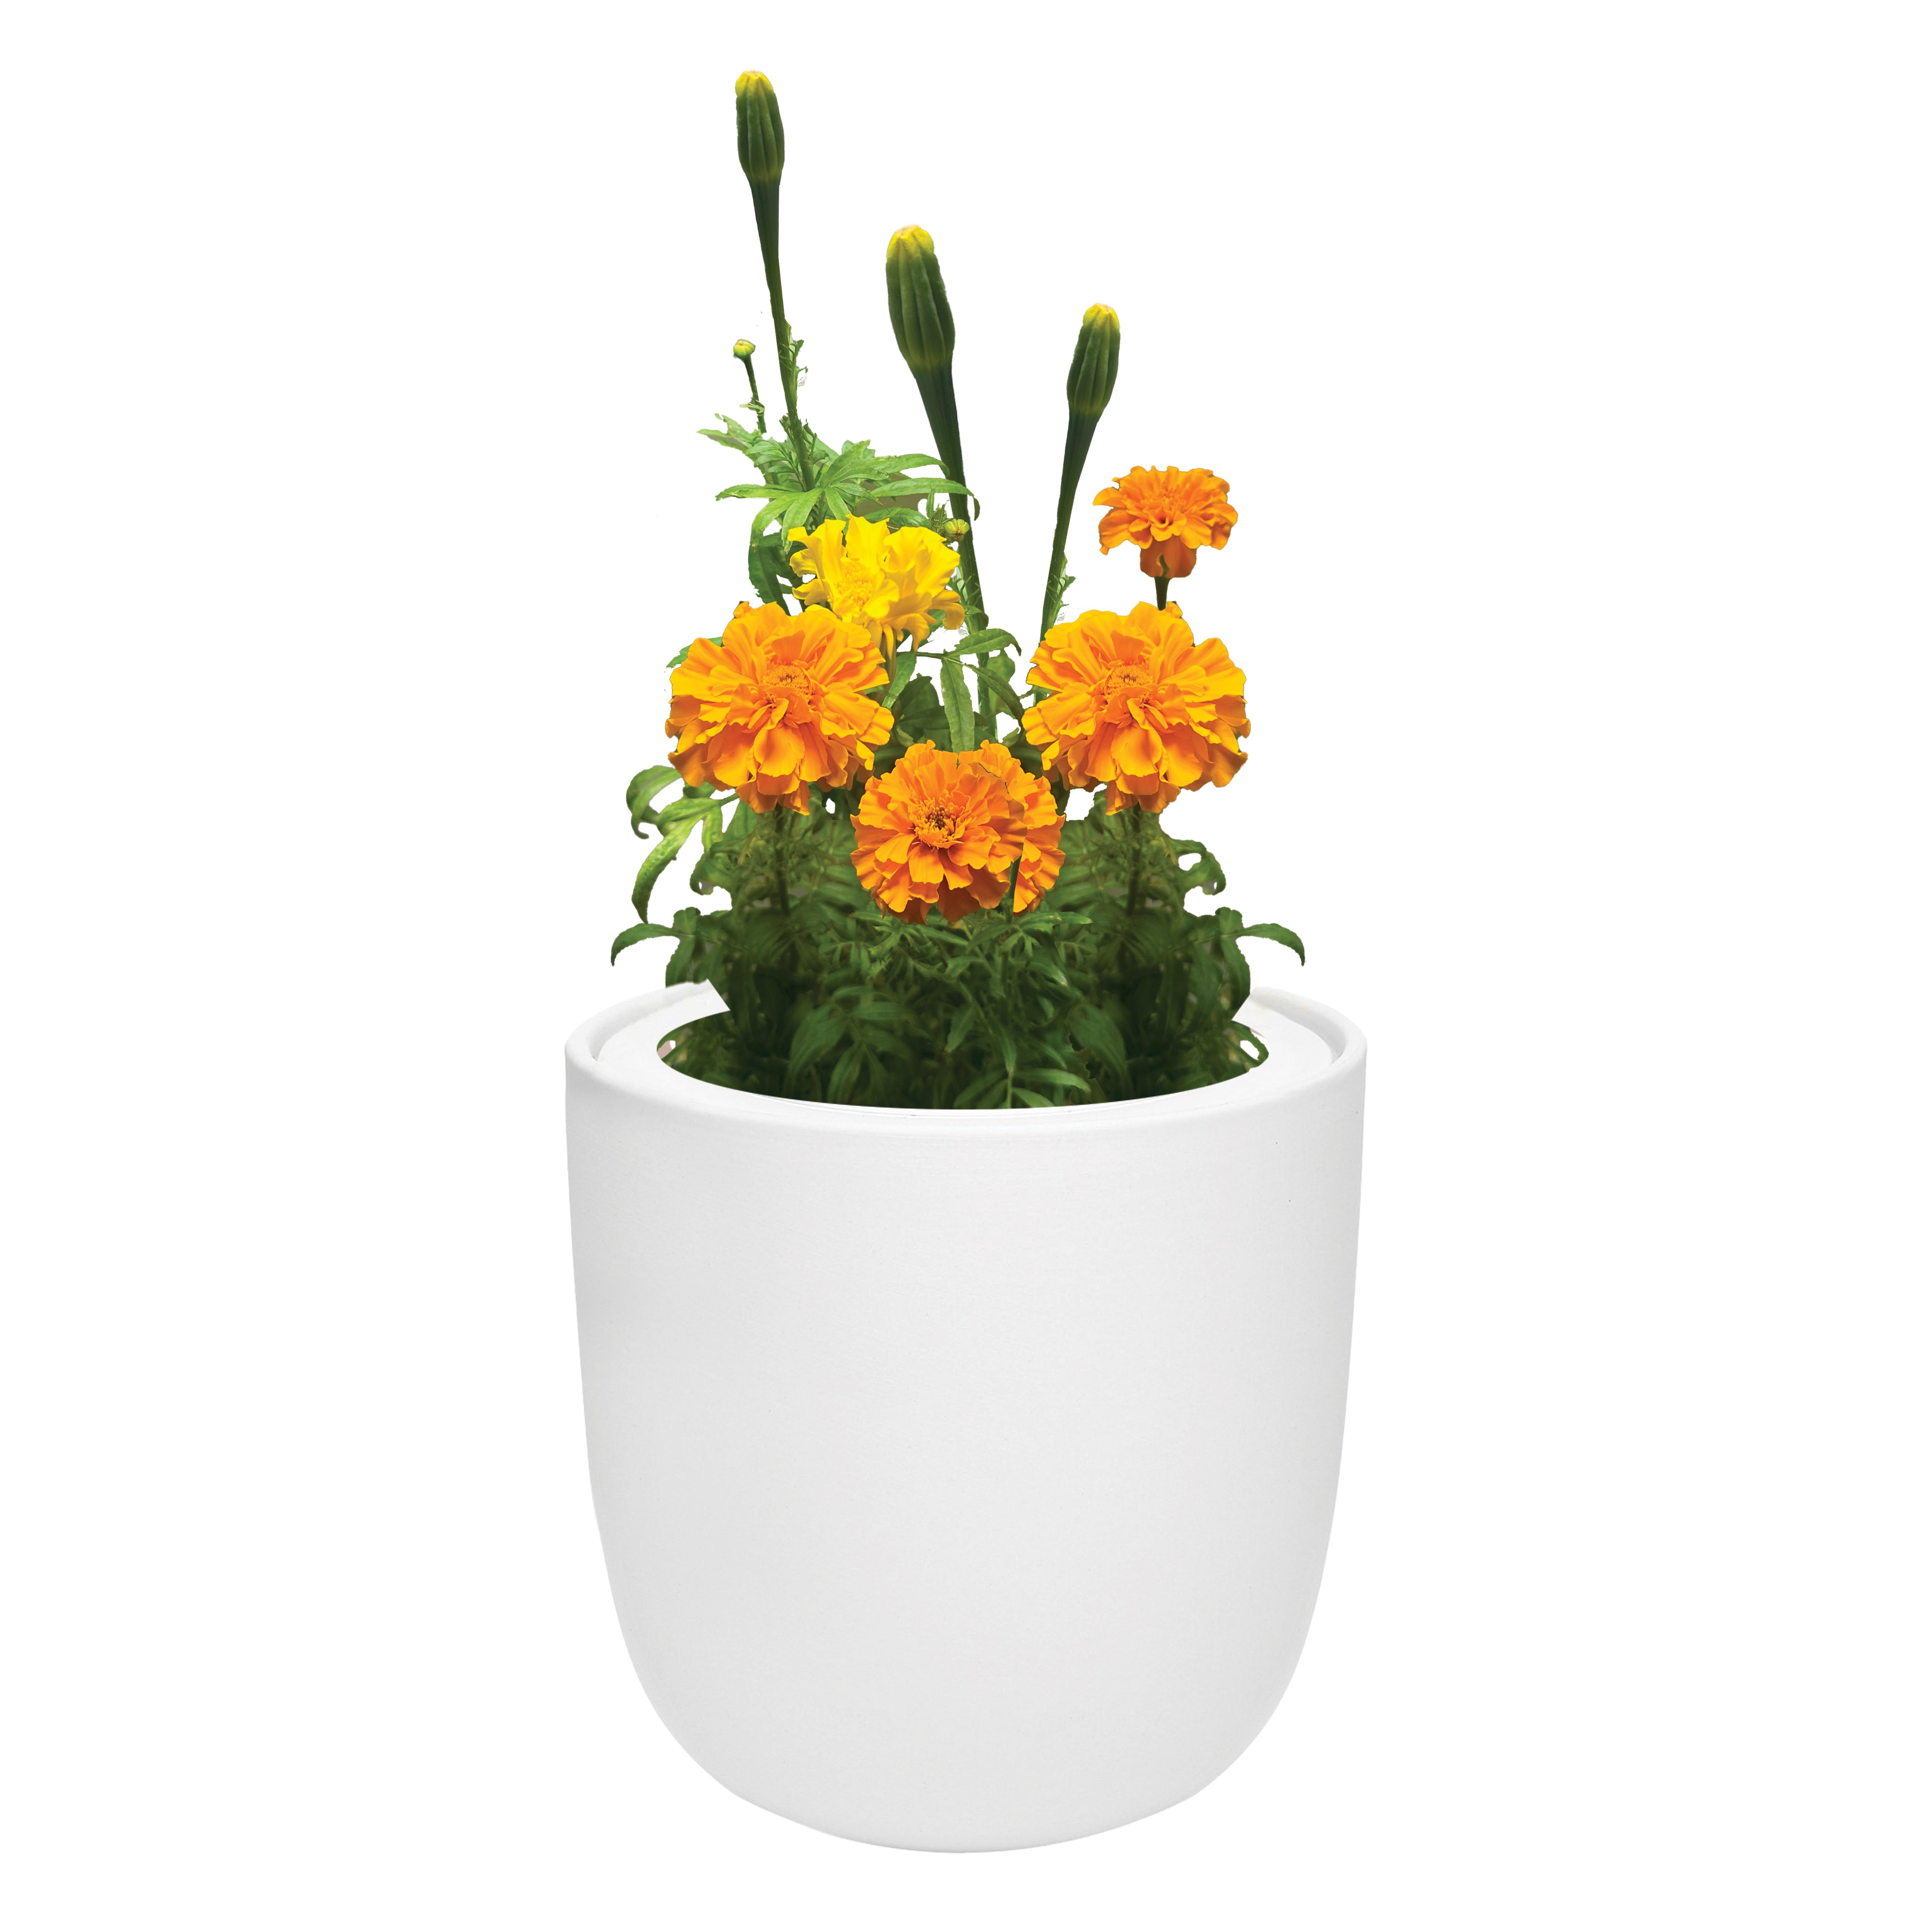 Marigold White Ceramic Pot Hydroponic Growing Kit with Seeds